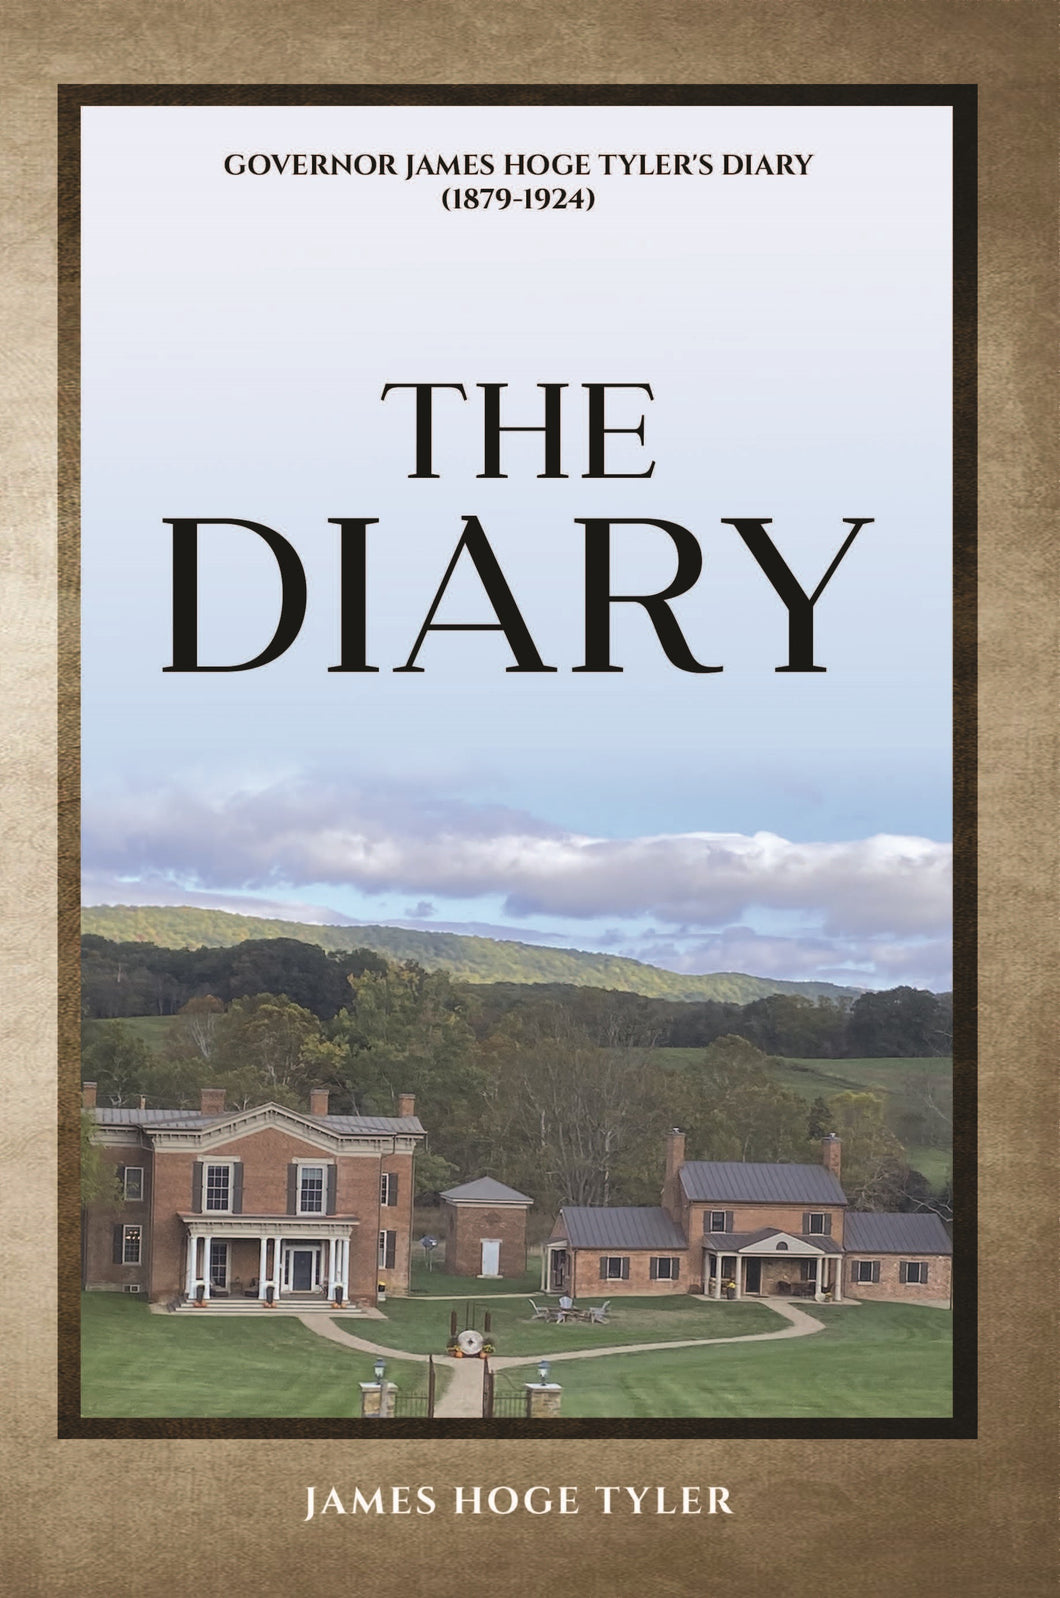 The Diary: Governor James Hoge Tyler's Diary (1879-1924)